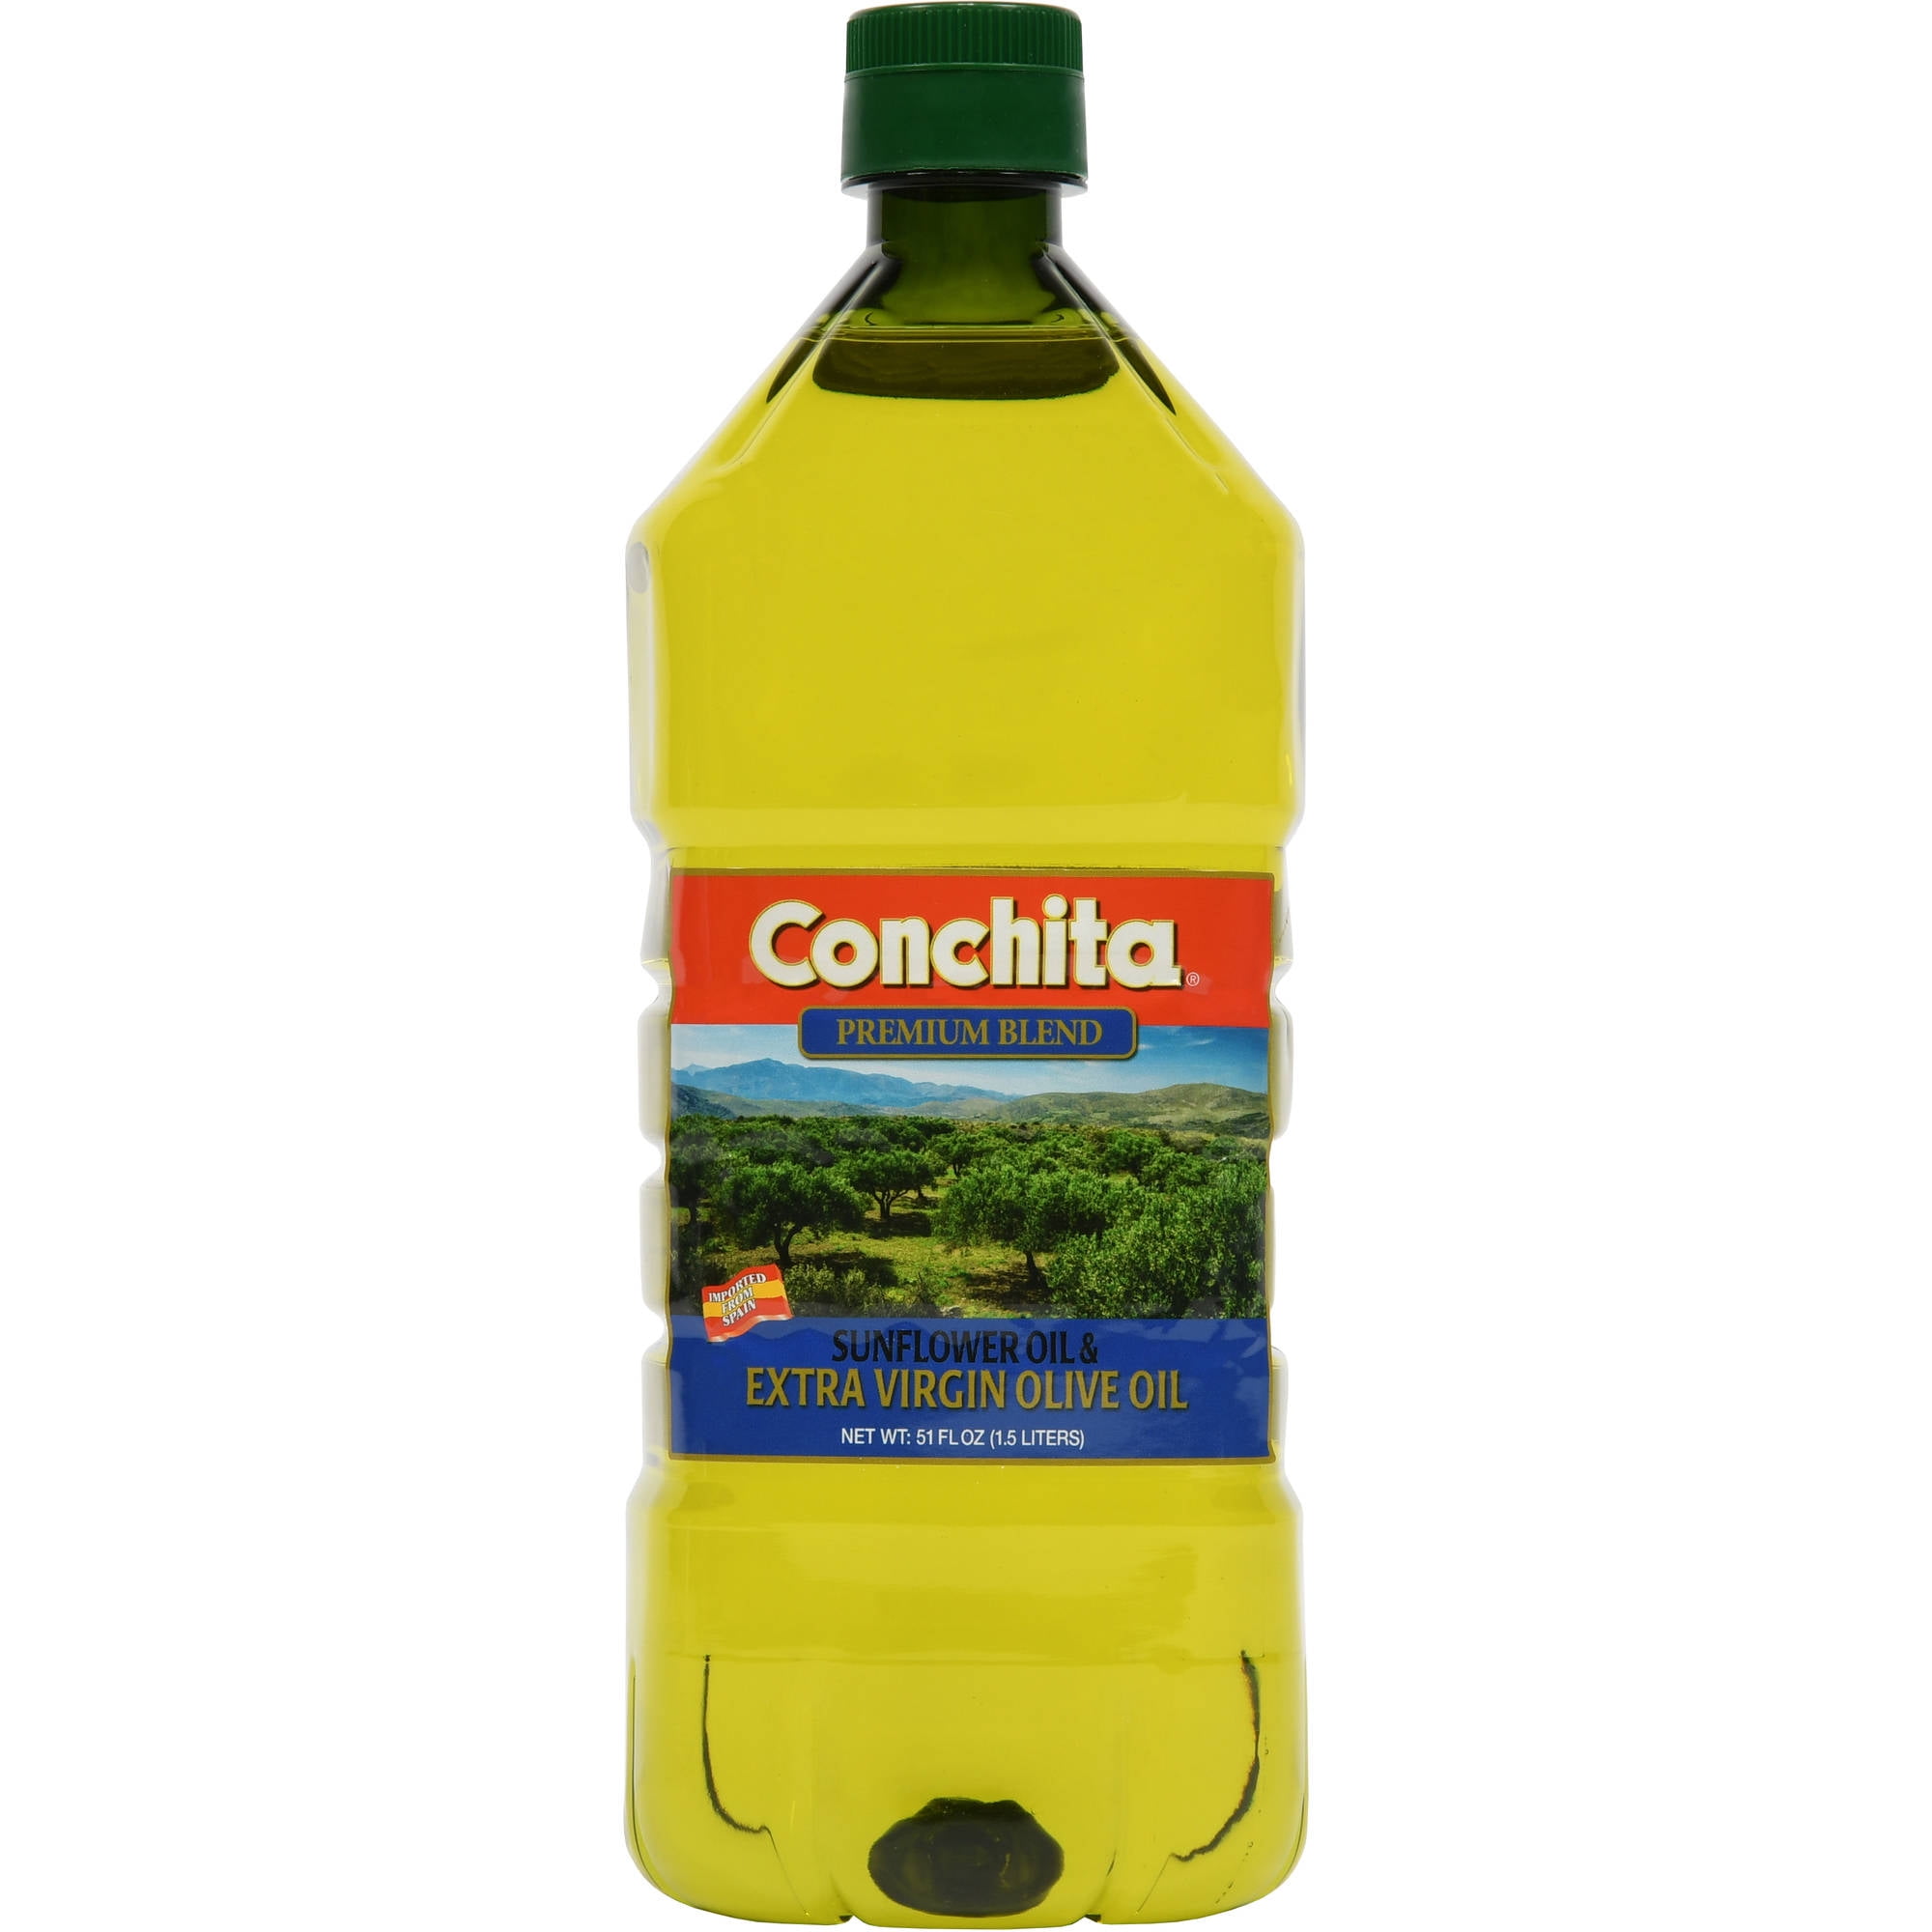 Buy Extra Virgin Olive Oil Online, 35 Lb. Container